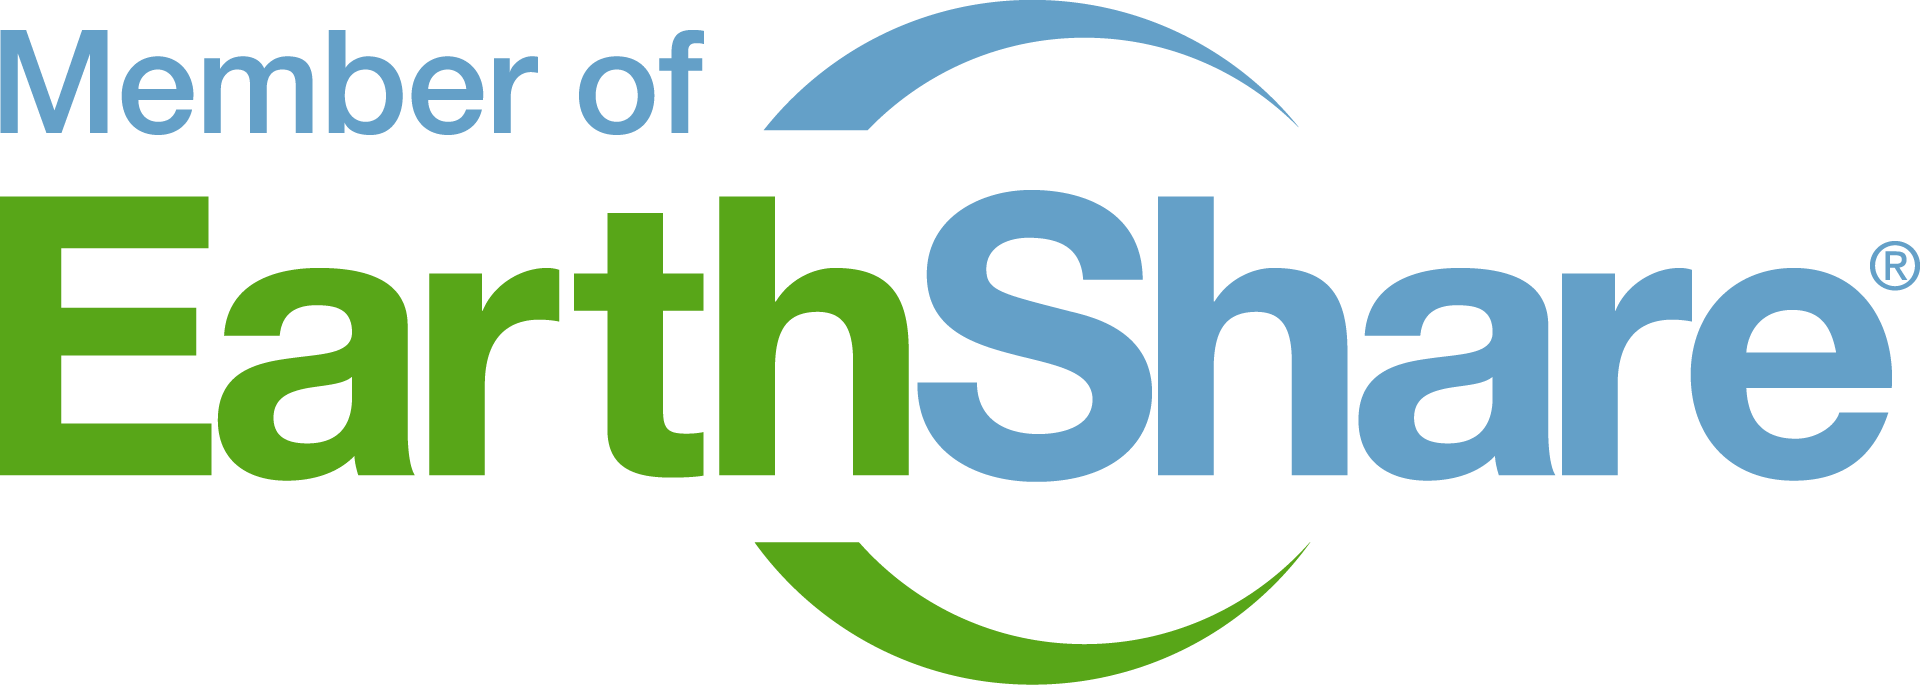 Xerces is a member of EarthShare